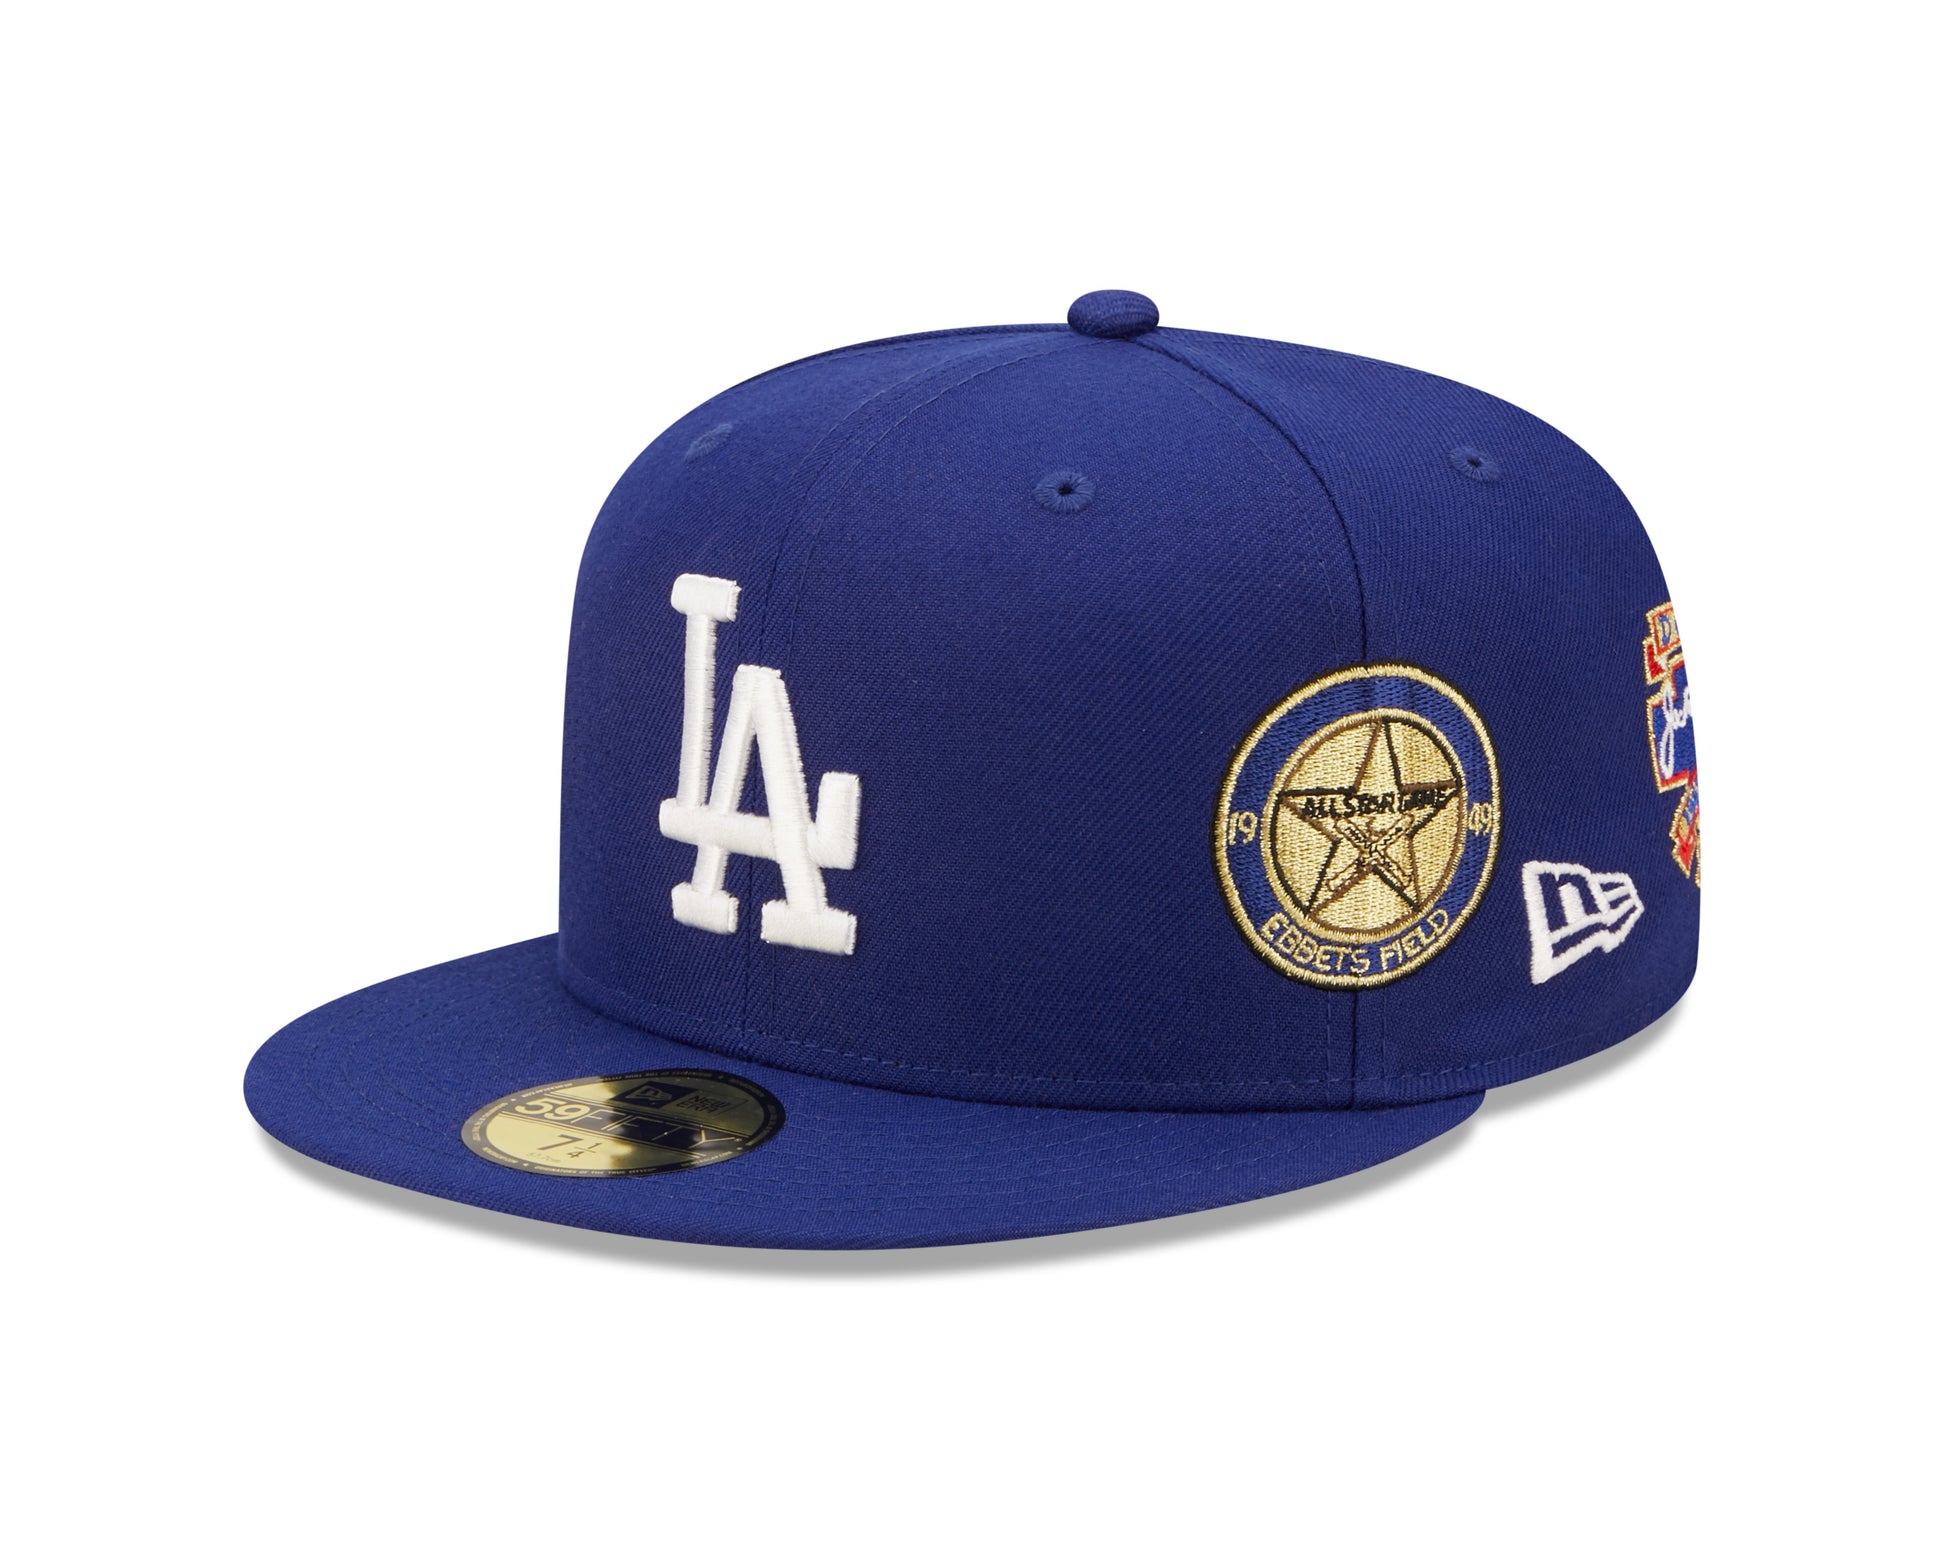 Los Angeles Dodgers Cooperstown Multi Patch 59FIFTY Cap - Royal Blue - Headz Up 